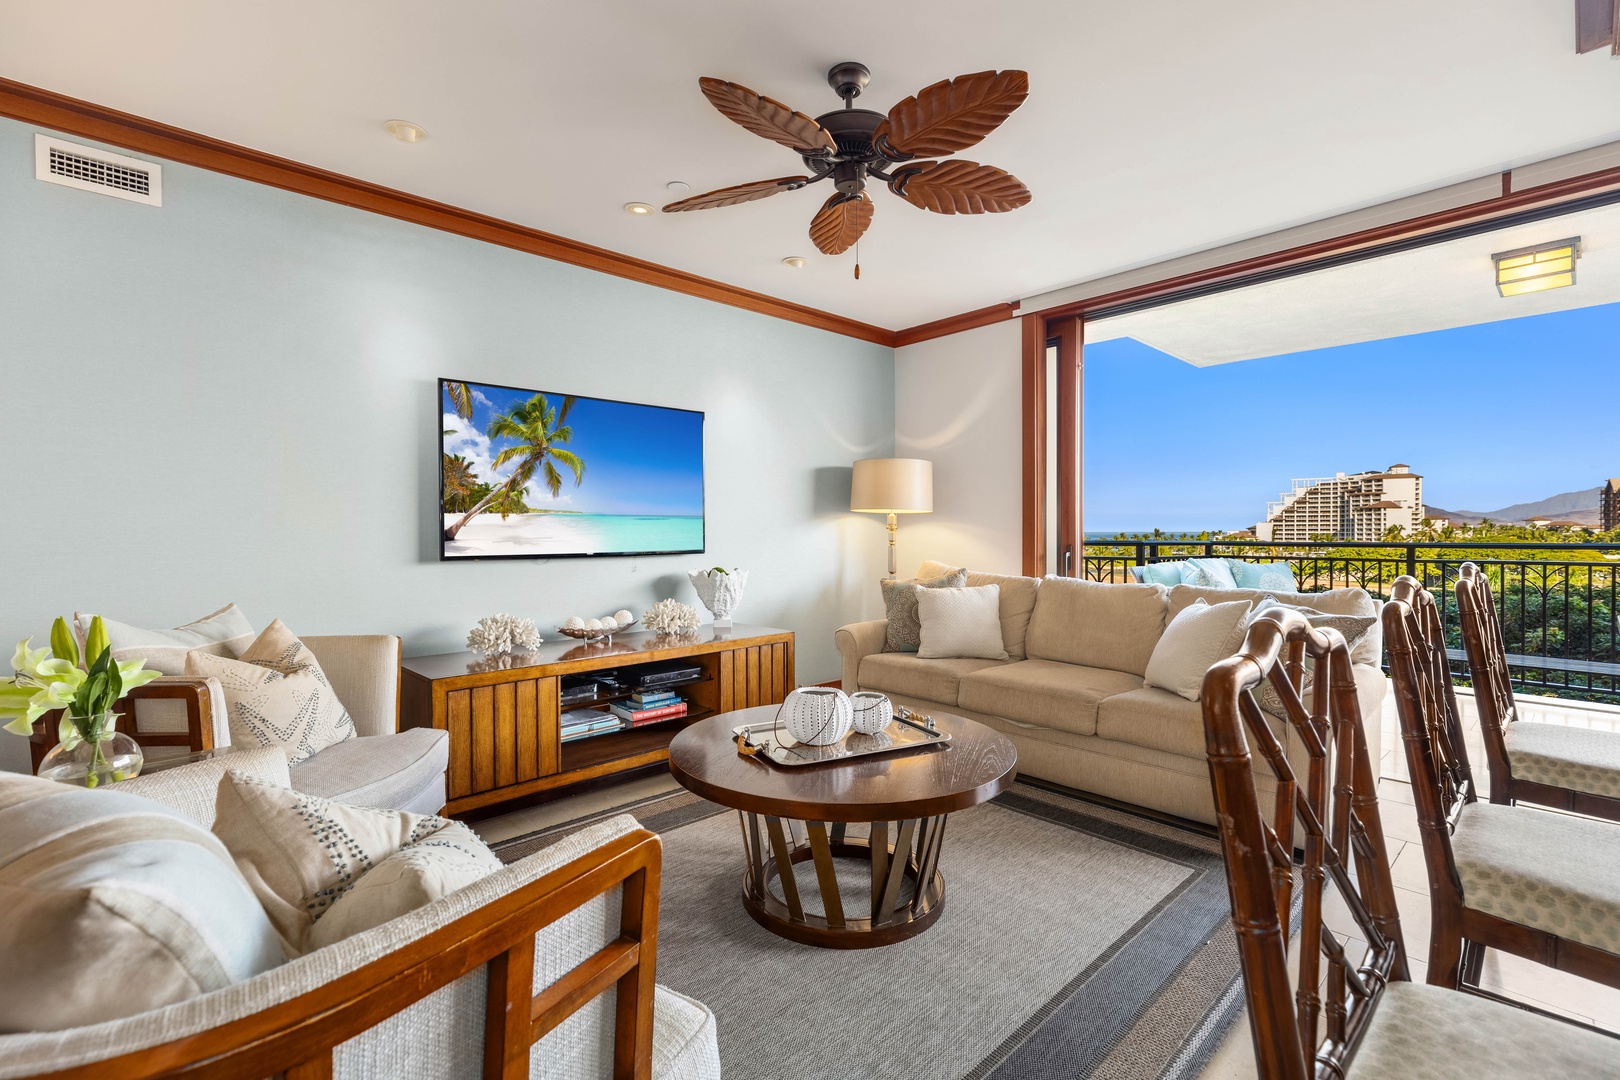 Kapolei Vacation Rentals, Ko Olina Beach Villa B604 - Flow effortlessly from the living area to the sunlit patio.